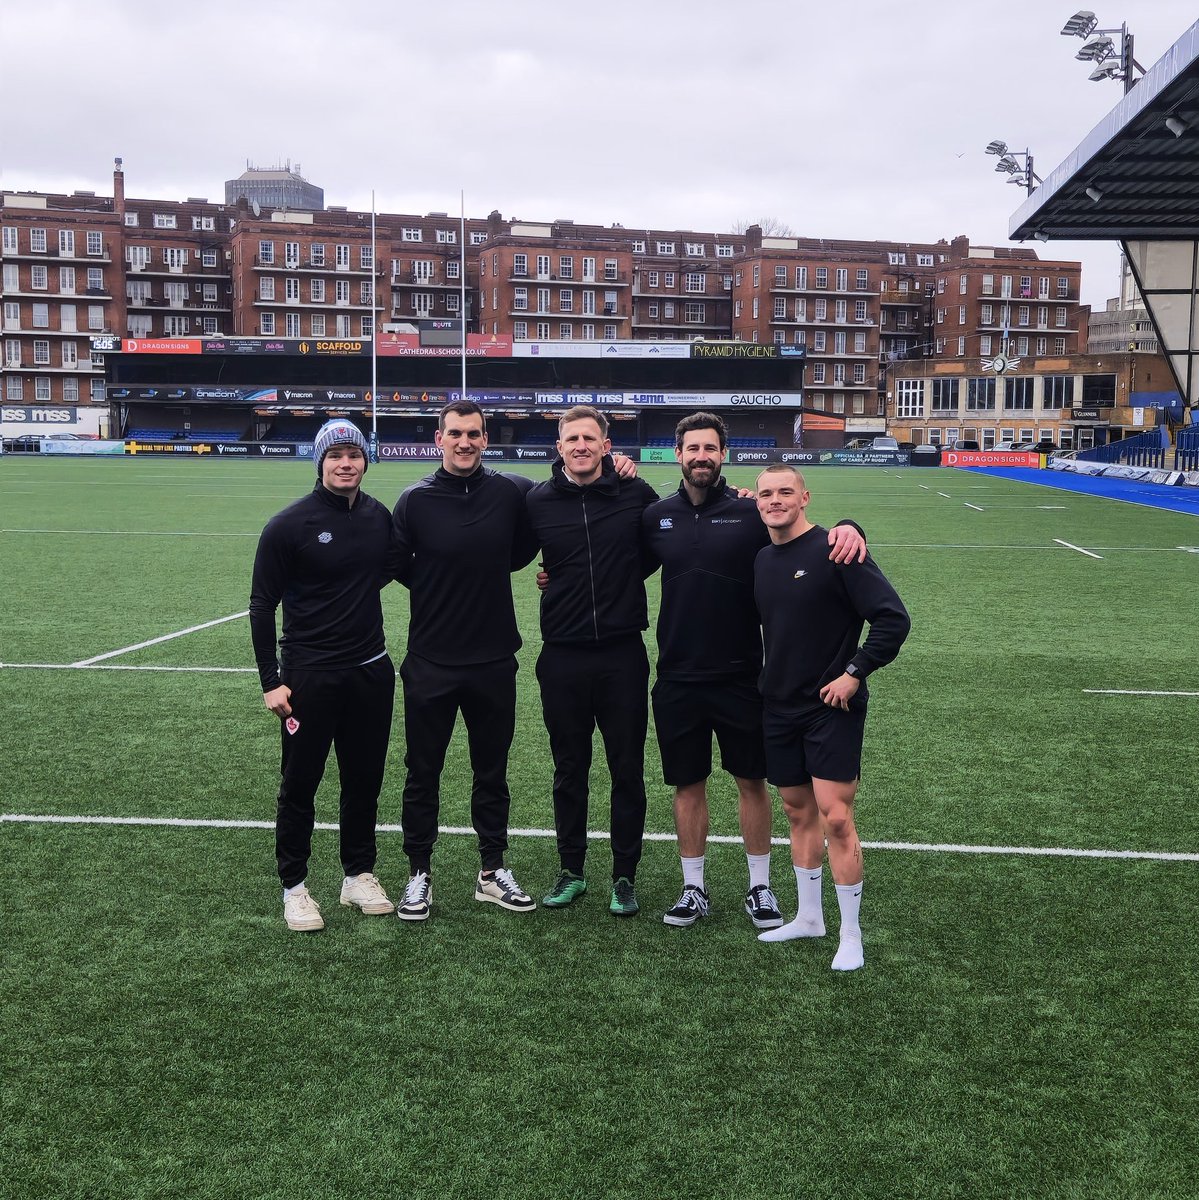 Great day filming with @SW7Academy 🔥🙌 We focused on tips to help your game on the pitch and in the gym. Keep an eye out for the content 👊 Let's go 🙌 @samwarburton_ @JaminHodgkins #therugbytrainer #Rugby